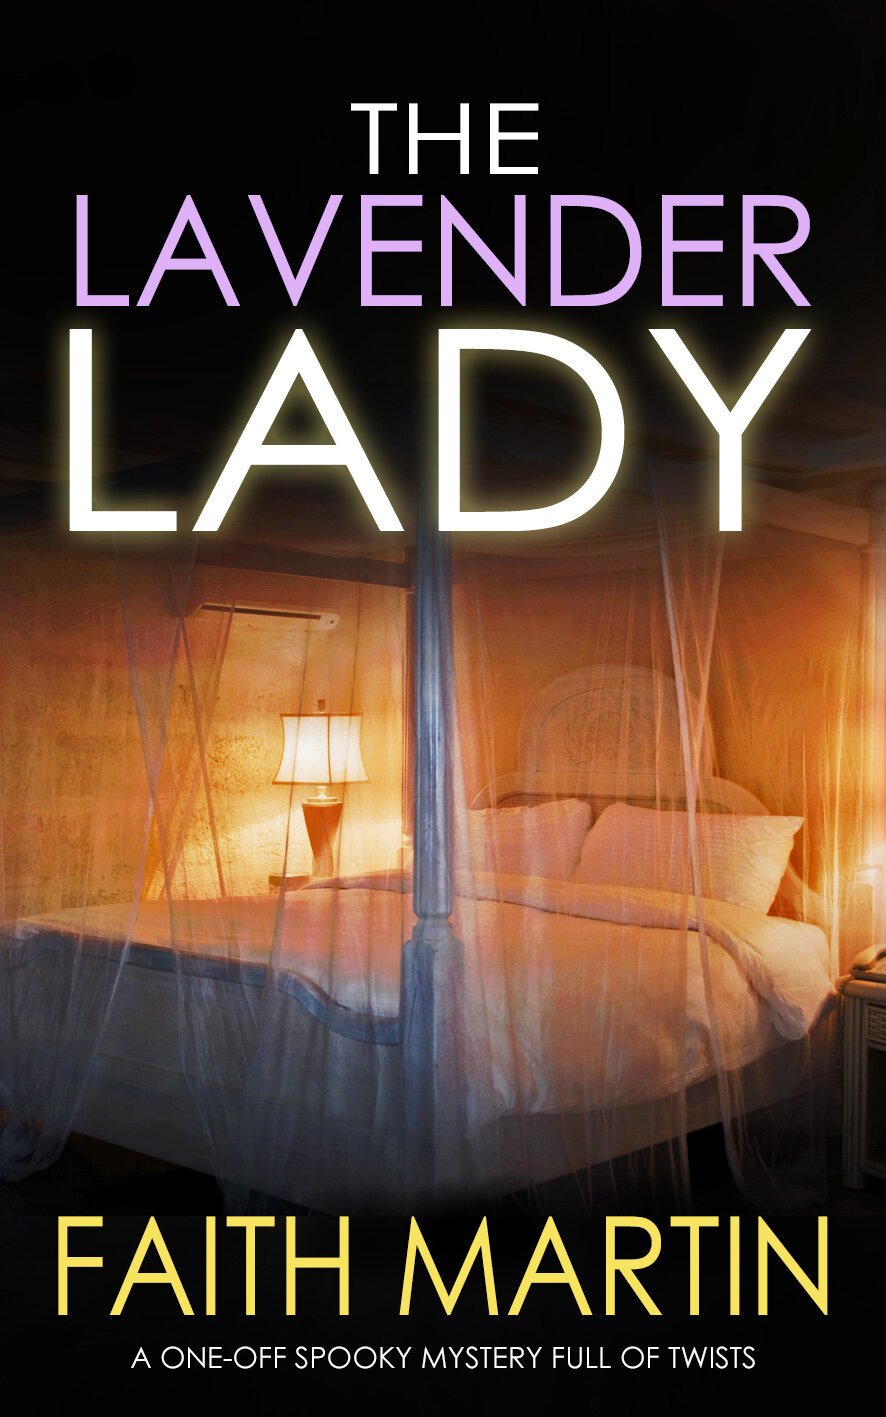 THE LAVENDER LADY PUBLISH cover.jpg